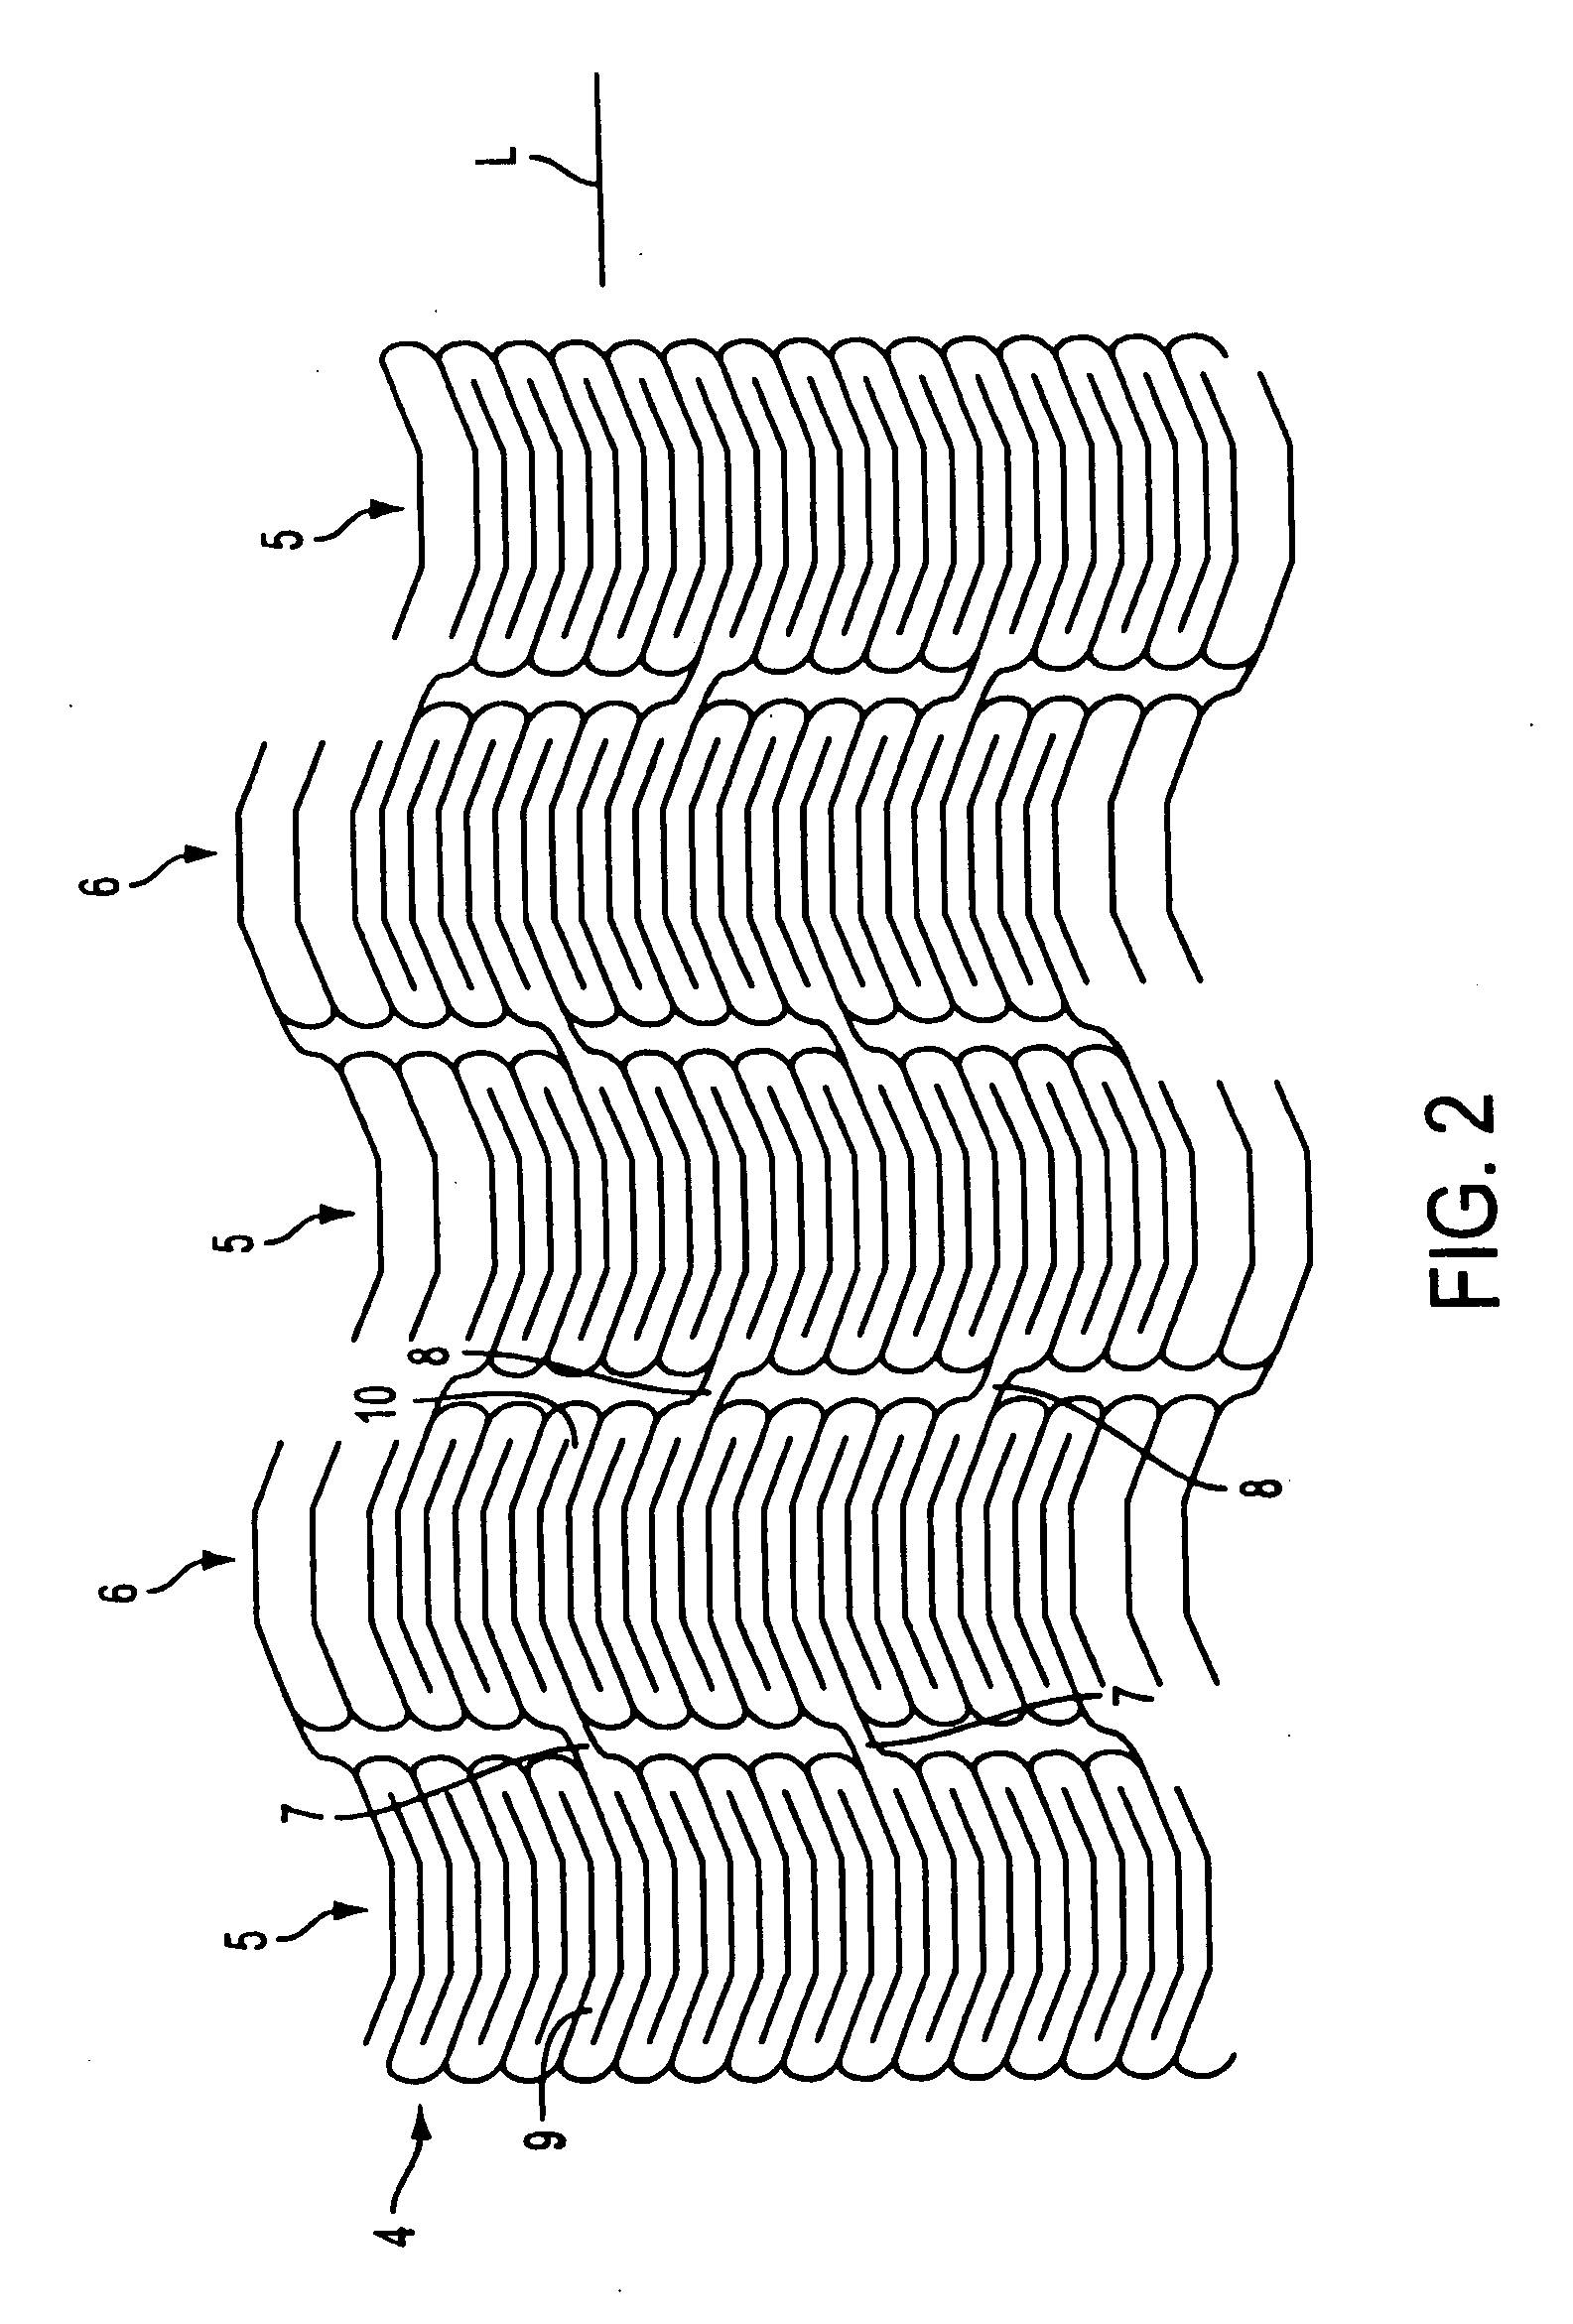 Method and apparatus for stenting comprising enhanced embolic protection coupled with improved protections against restenosis and thrombus formation